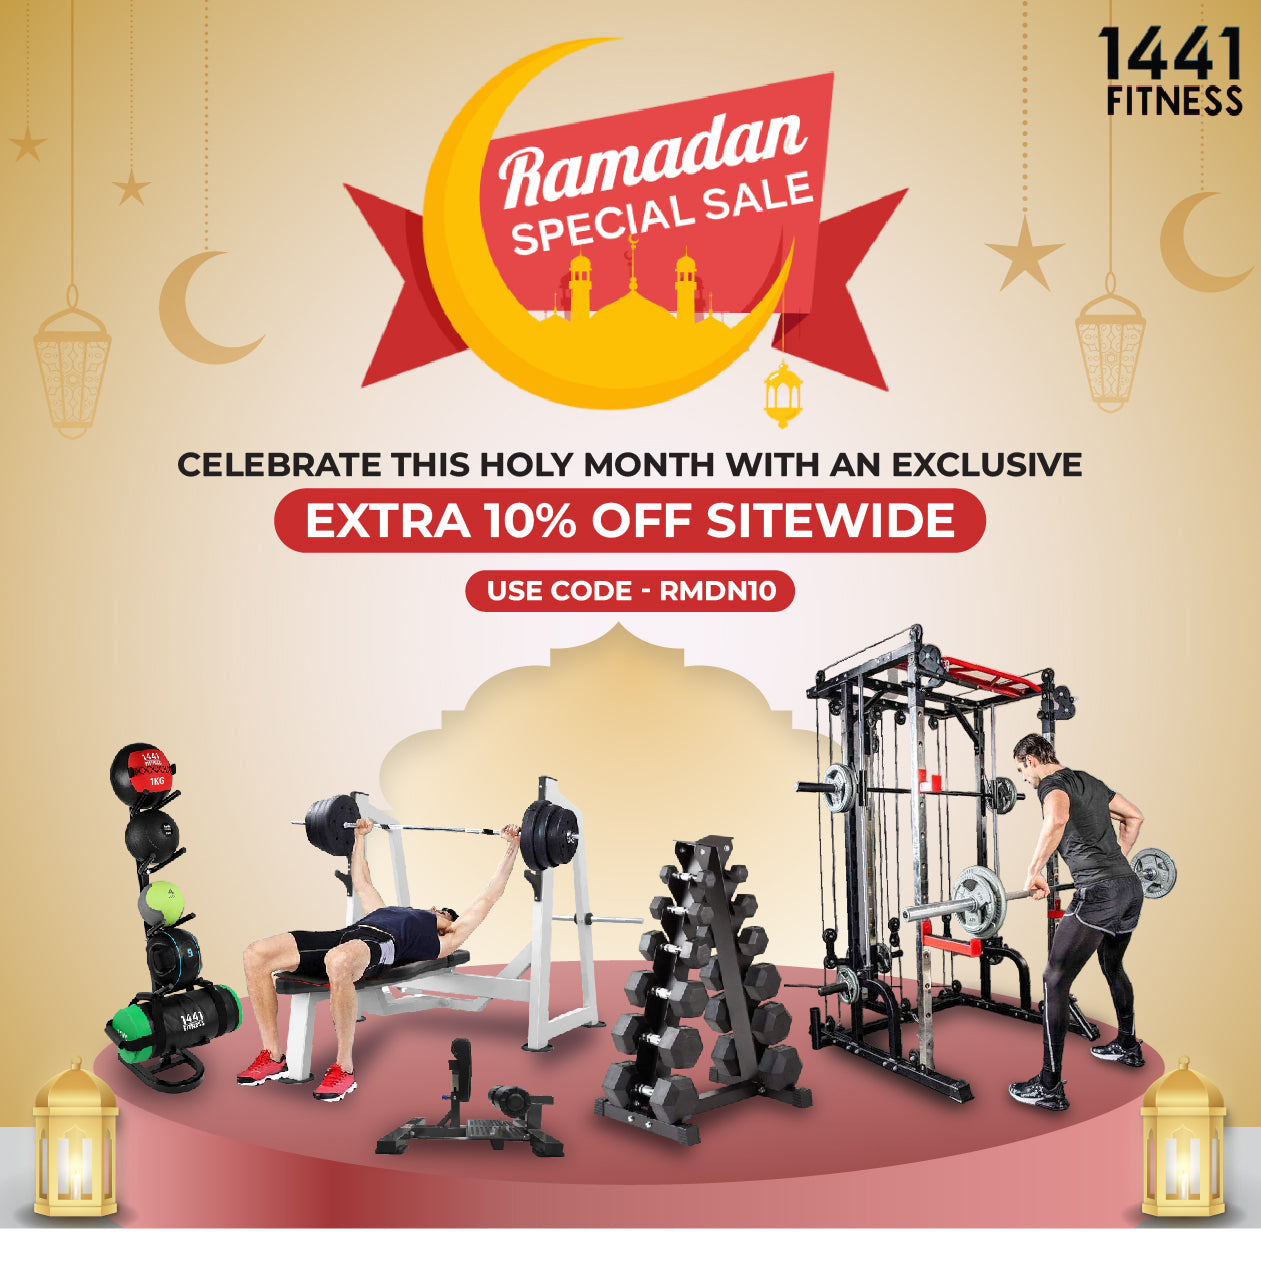 1 Fitness & Gym Equipment Online Store in UAE